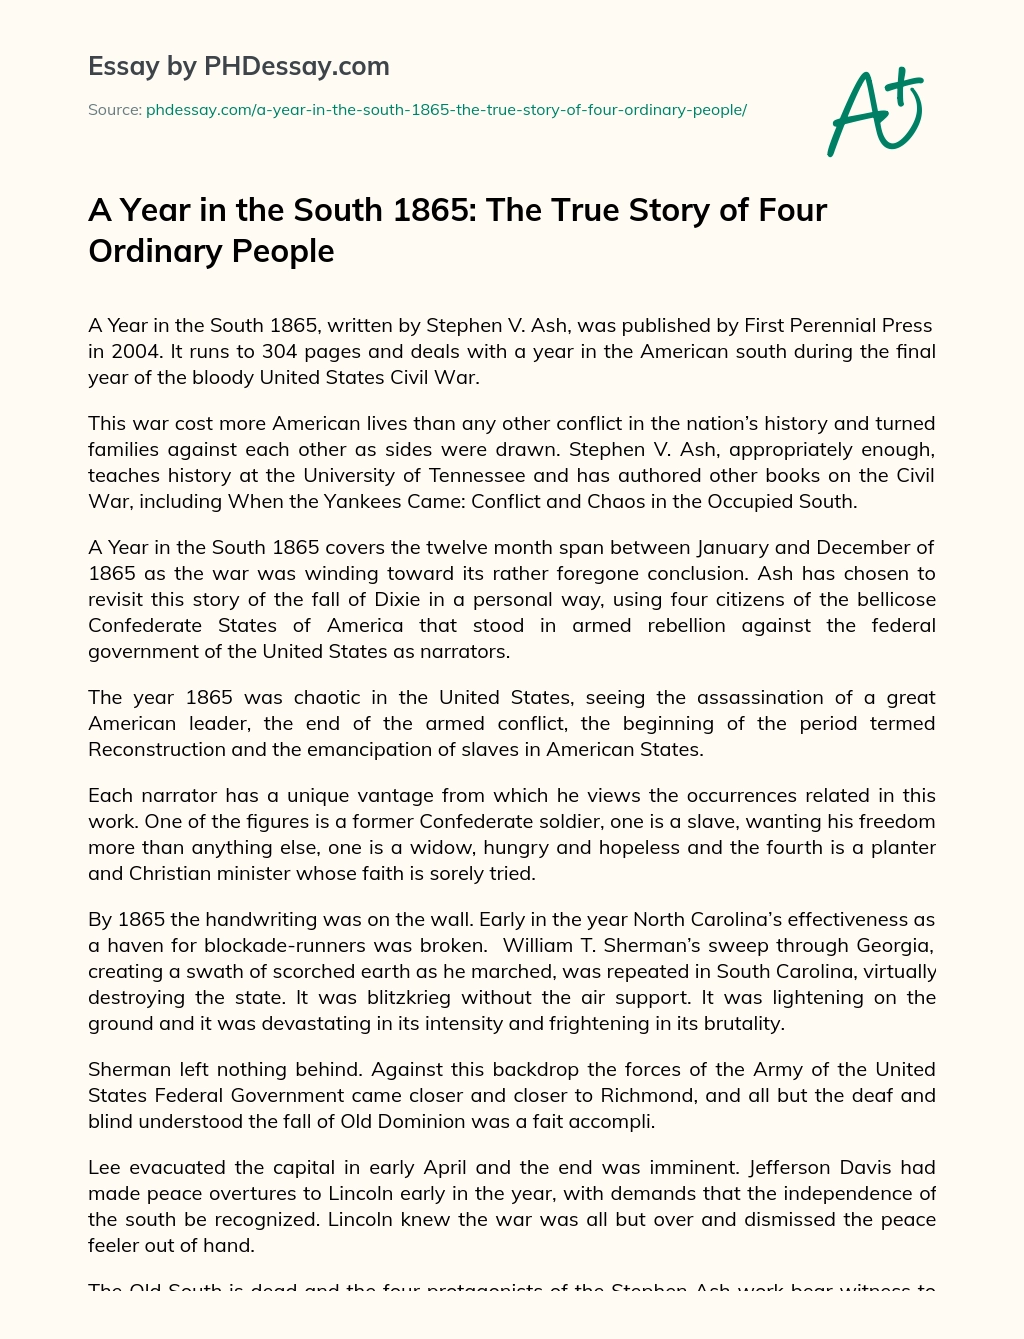 A Year in the South 1865: The True Story of Four Ordinary People essay